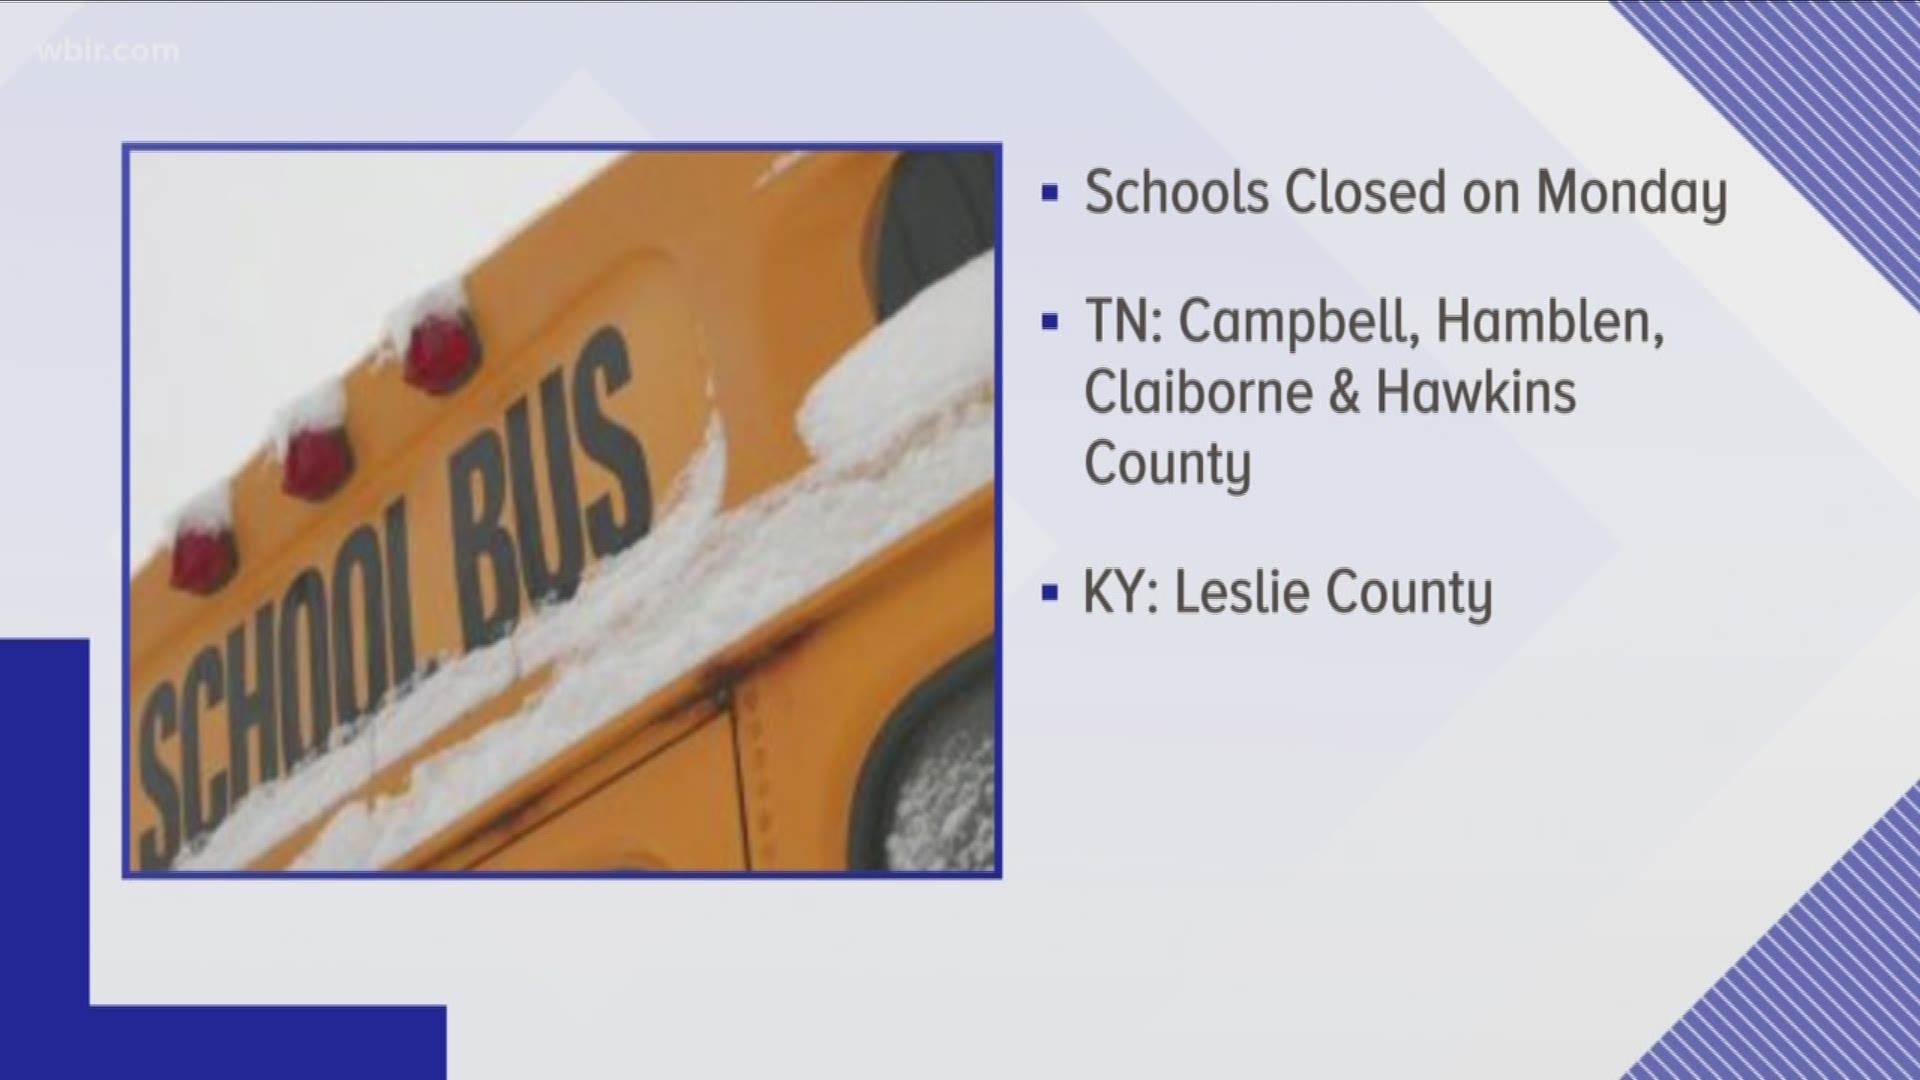 Several school districts are taking precautions and looking at whether or not to open the doors tomorrow.